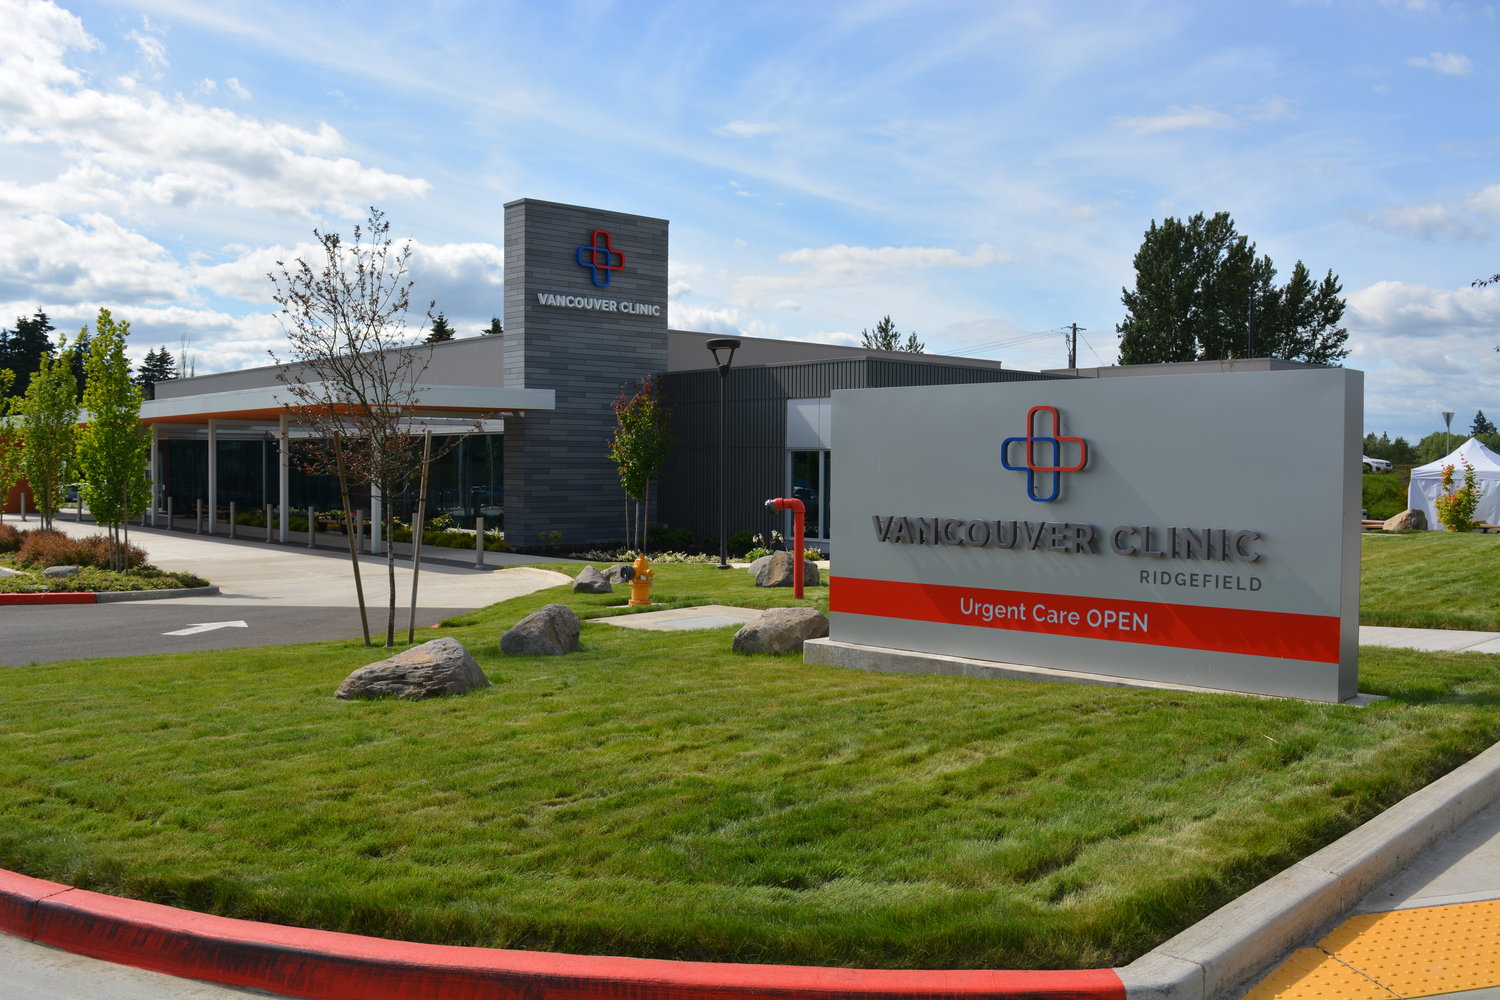 The Ridgefield location of the Vancouver Clinic opened in July of last year to serve the North County city.